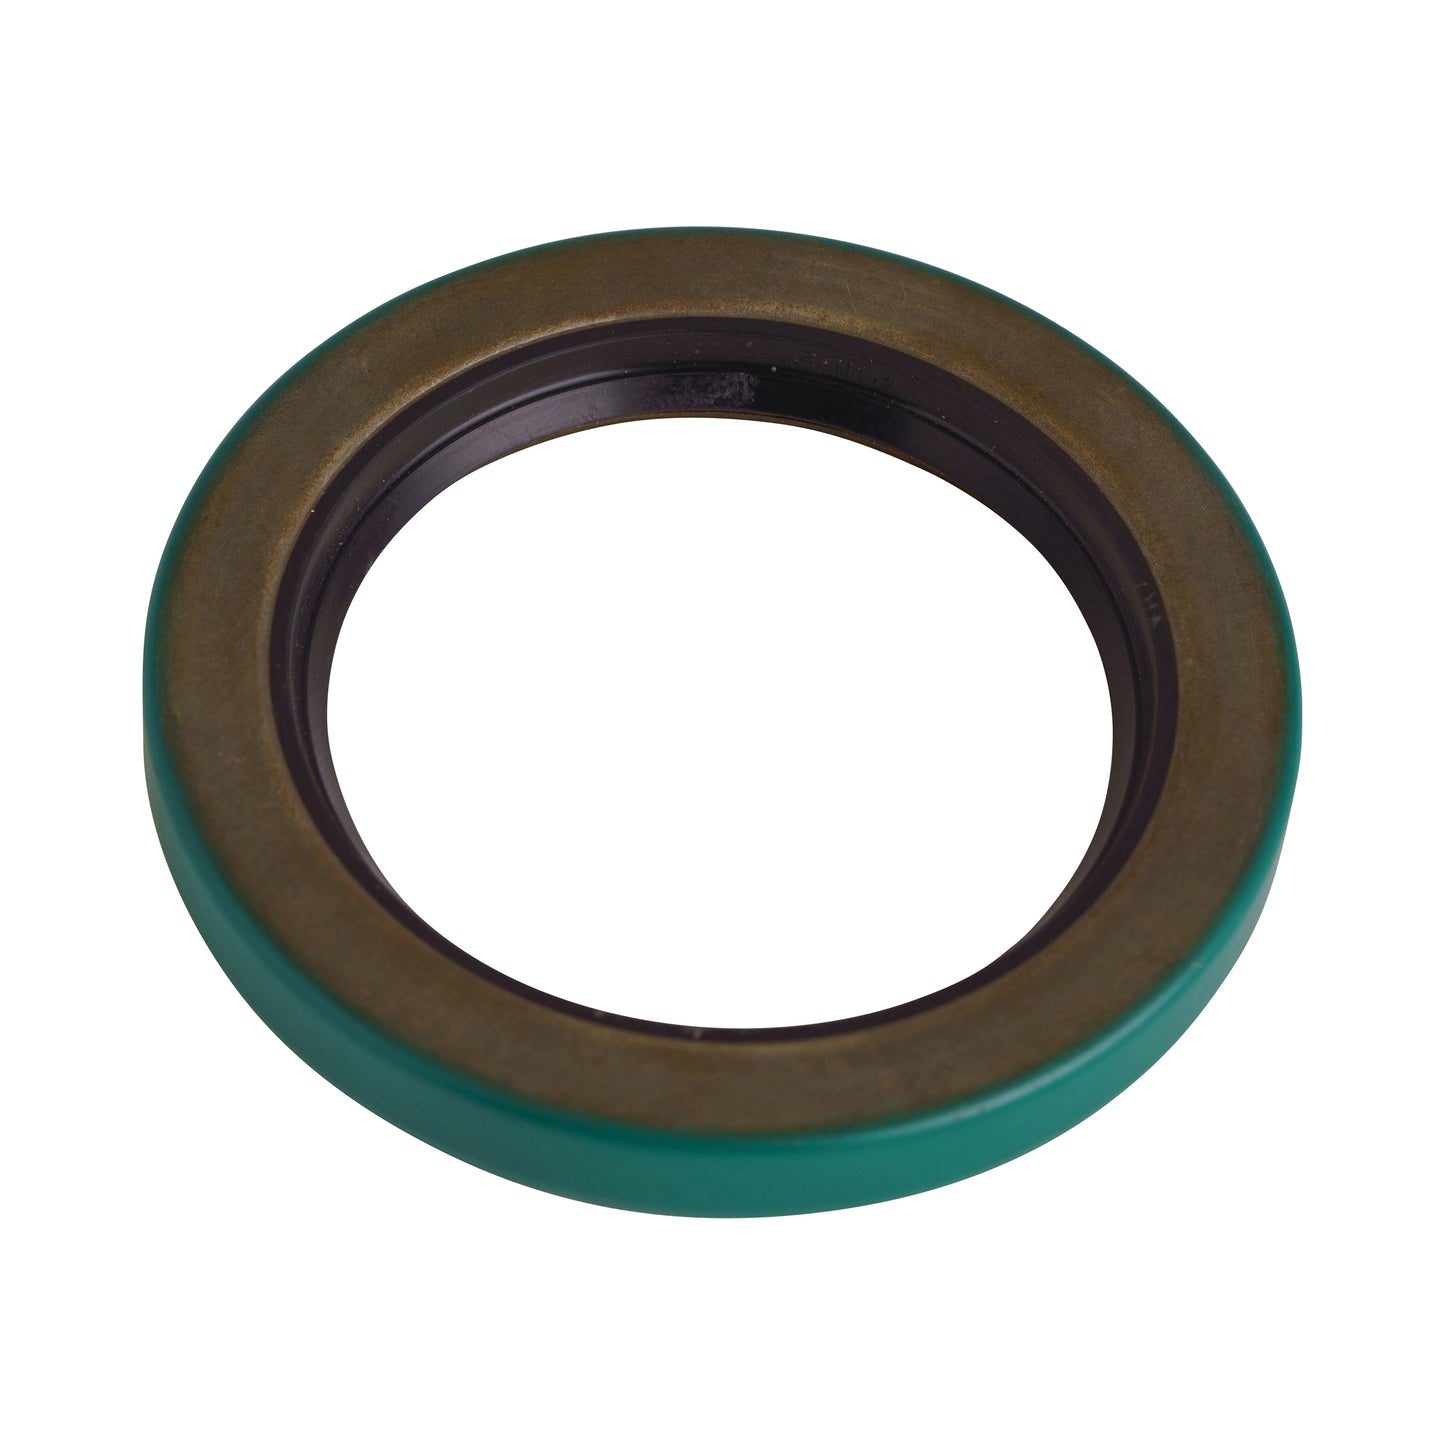 Trailer Grease Seal 2 1/4" Inner Diameter for 6 and 8 Lug Hubs and Drums